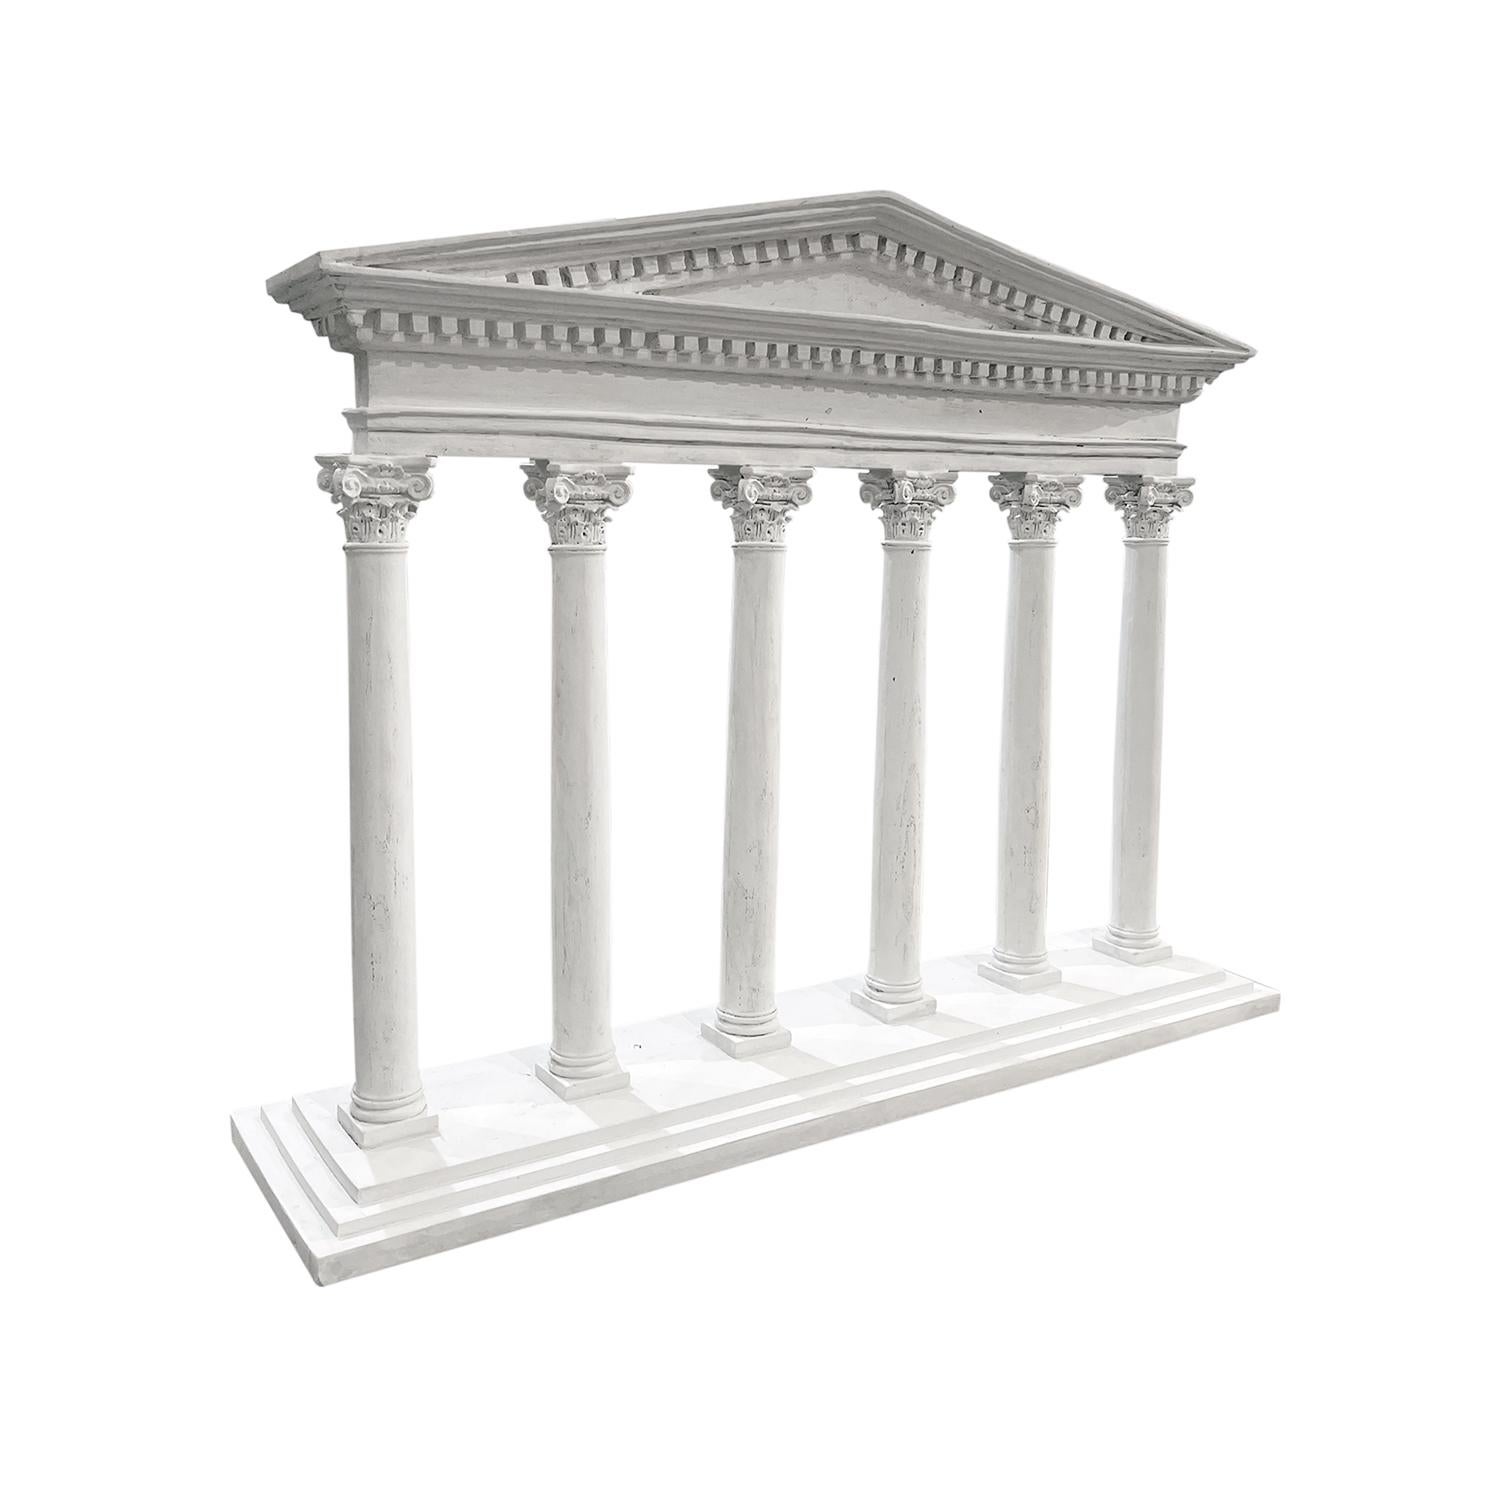 This vintage architectural model of an ancient Roman temple with Corinthian capitals is hand made in French plaster. The model represents the front of a classical temple with columns, capitals and a triangular pediment with Dentil molding. Still